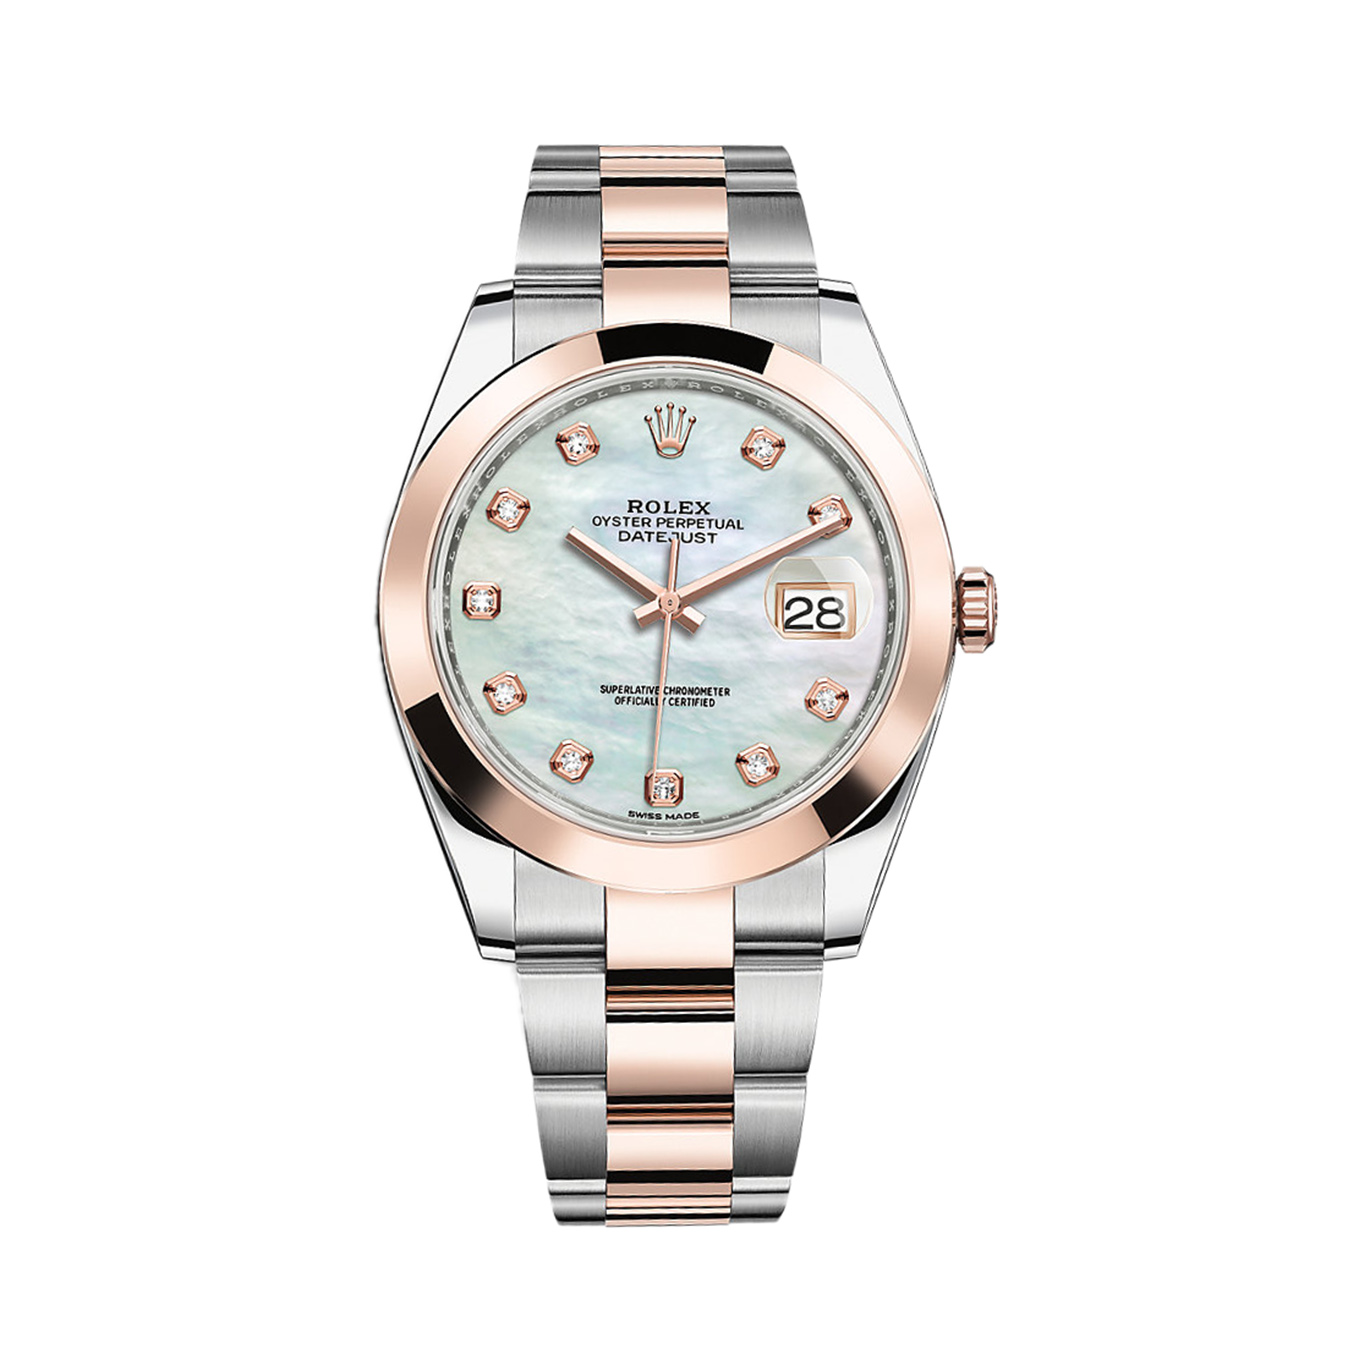 Datejust 41 126301 Rose Gold & Stainless Steel Watch (White Mother-of-Pearl Set with Diamonds)